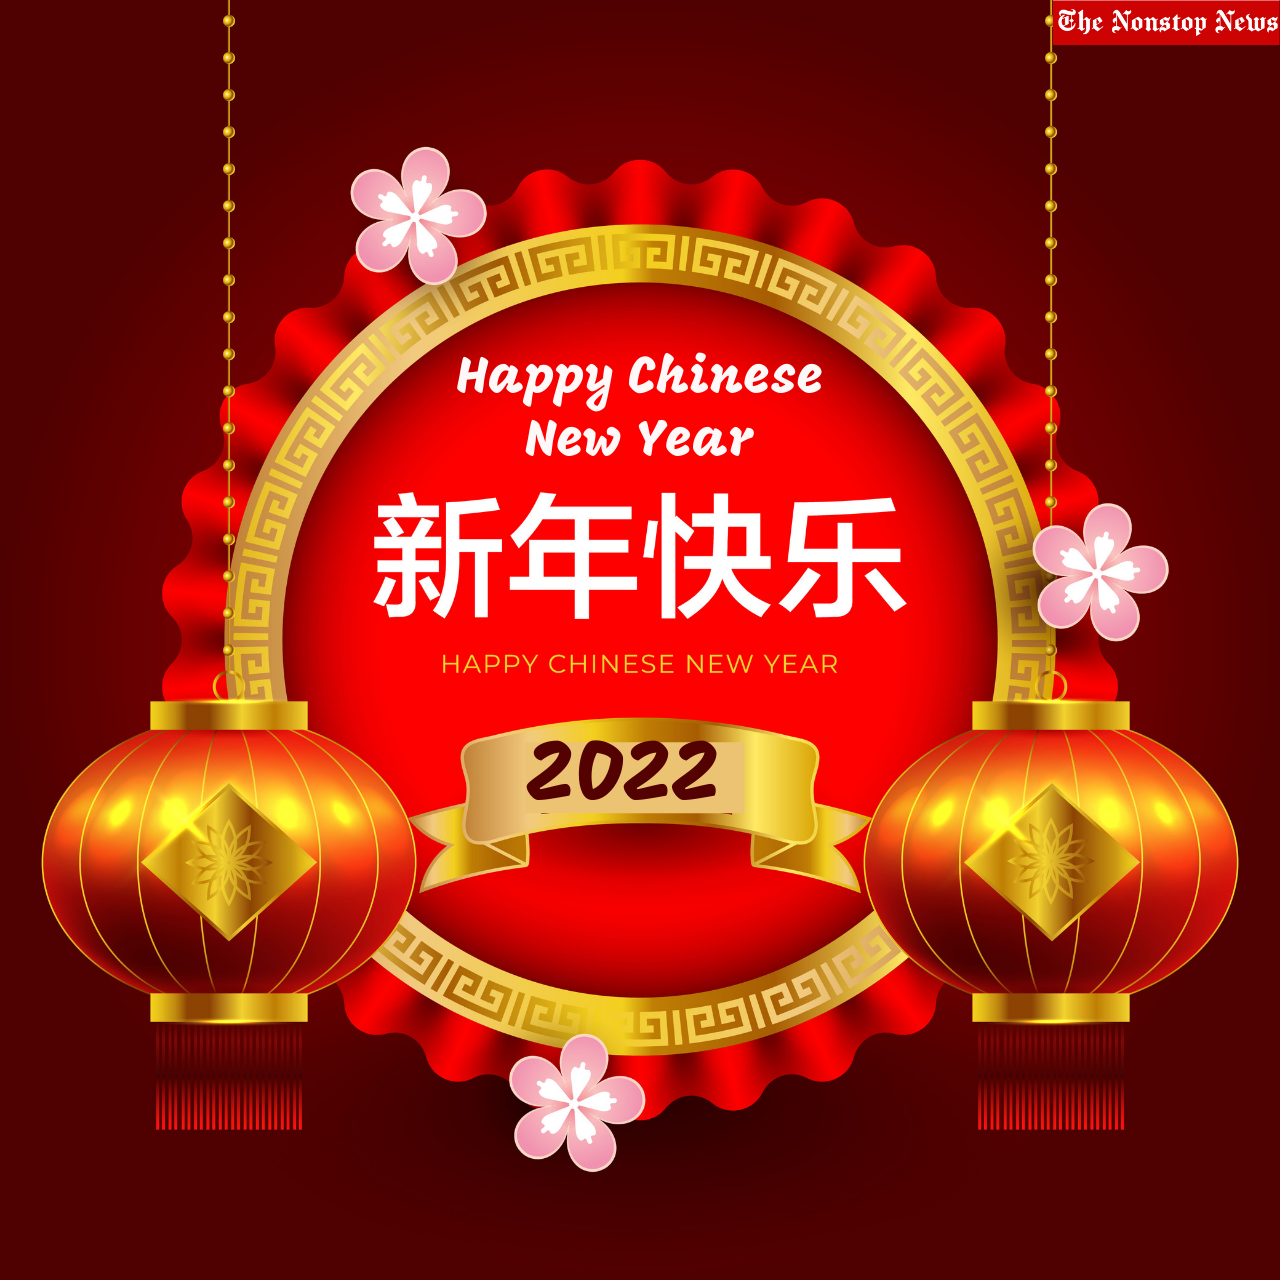 Chinese New Year 2022 WhatsApp Stickers, Greetings, Facebook Posts, Instagram Captions, Meme, Gifs to Share